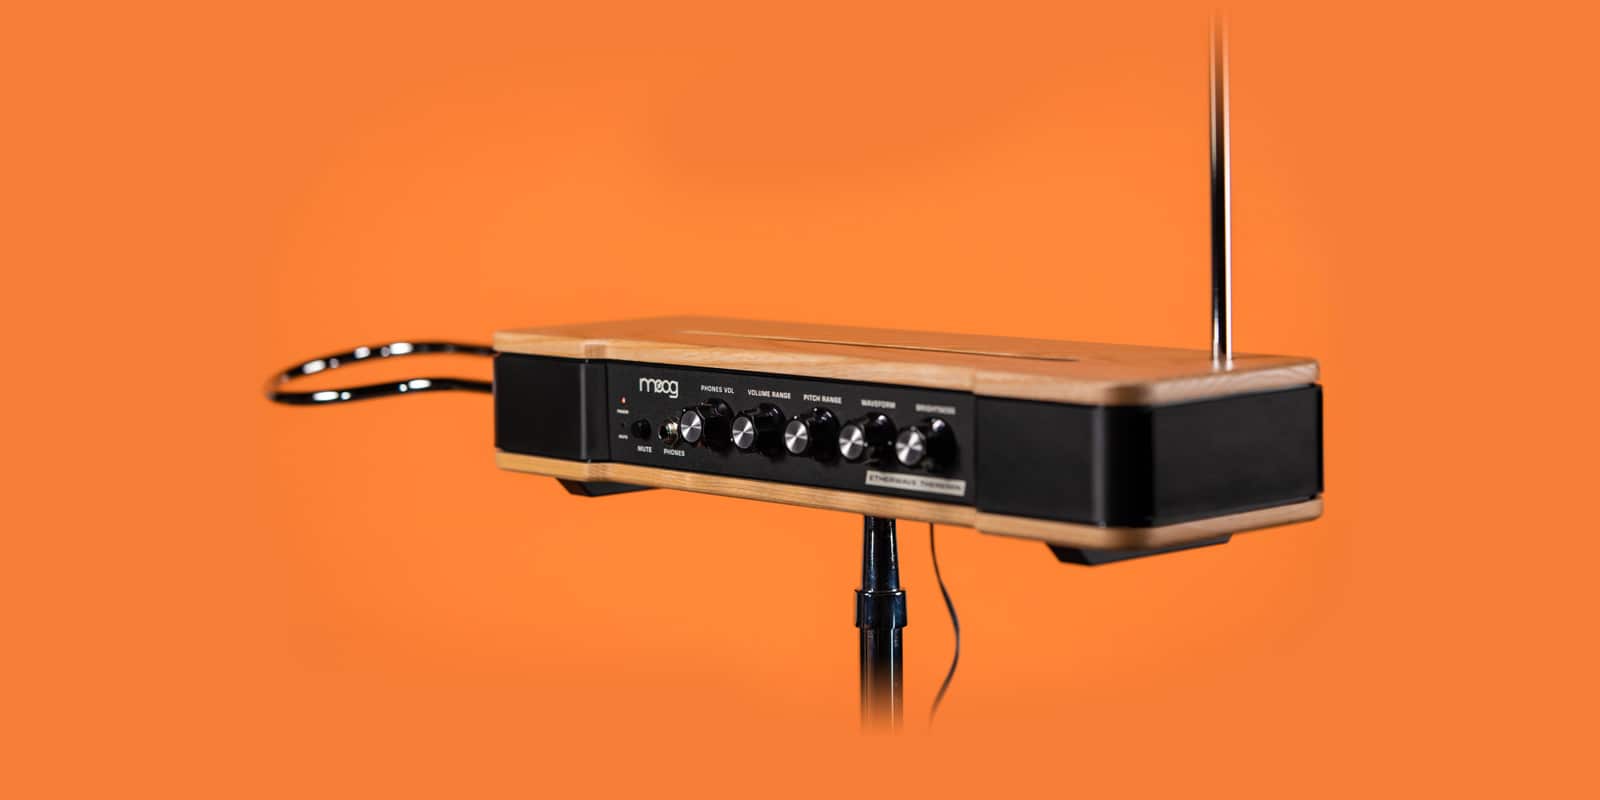 Moog Music's Etherwave Theremin Is Back